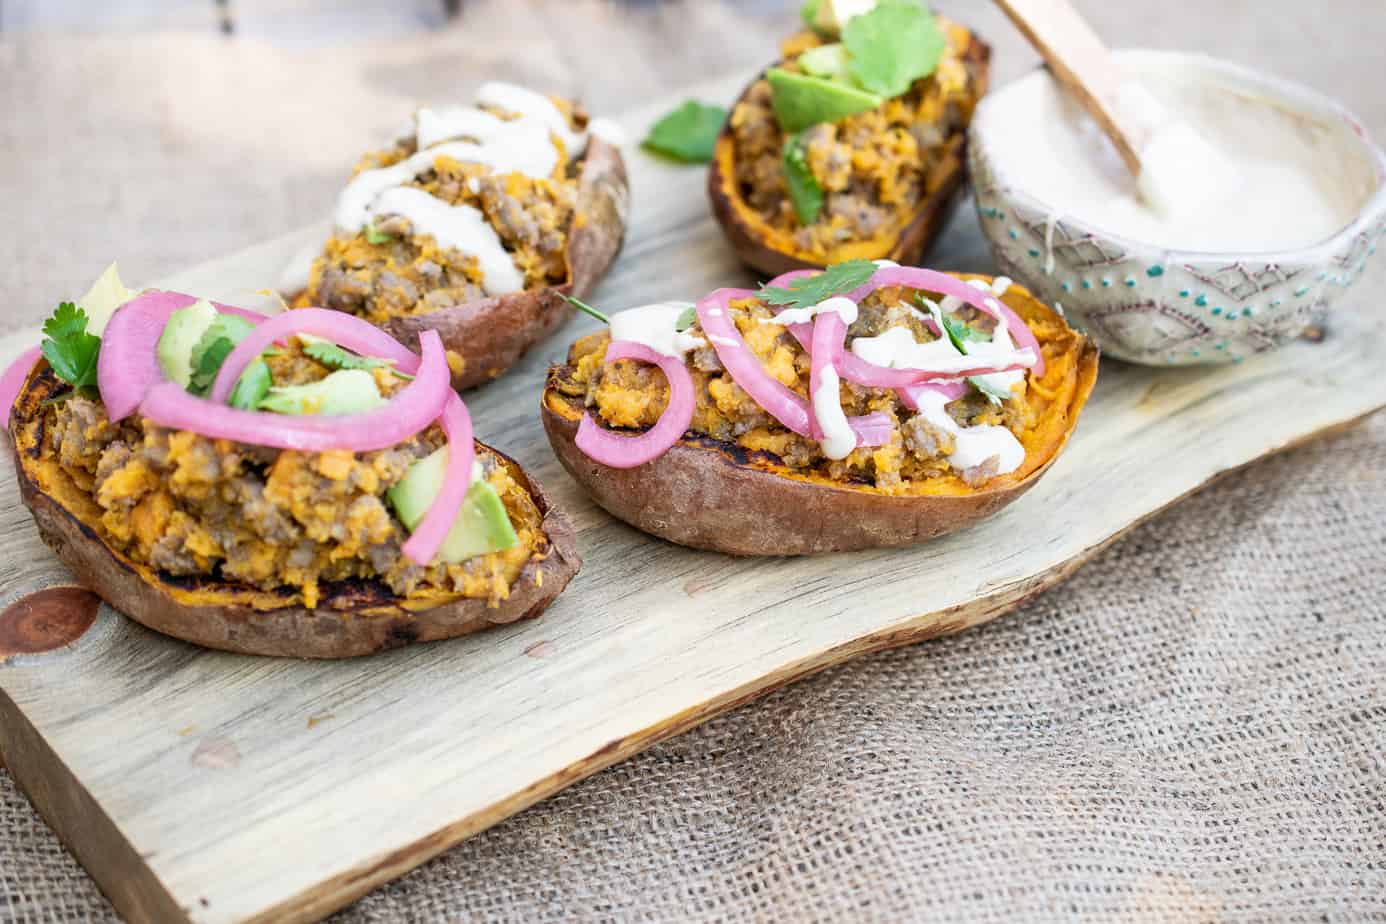 four stuffed sweet potato skins with ground sausage garnished with red onion, cilantro, and a mayo-based garnish. a bowl of the sauce on the side. all set on a plank of wood over cloth.